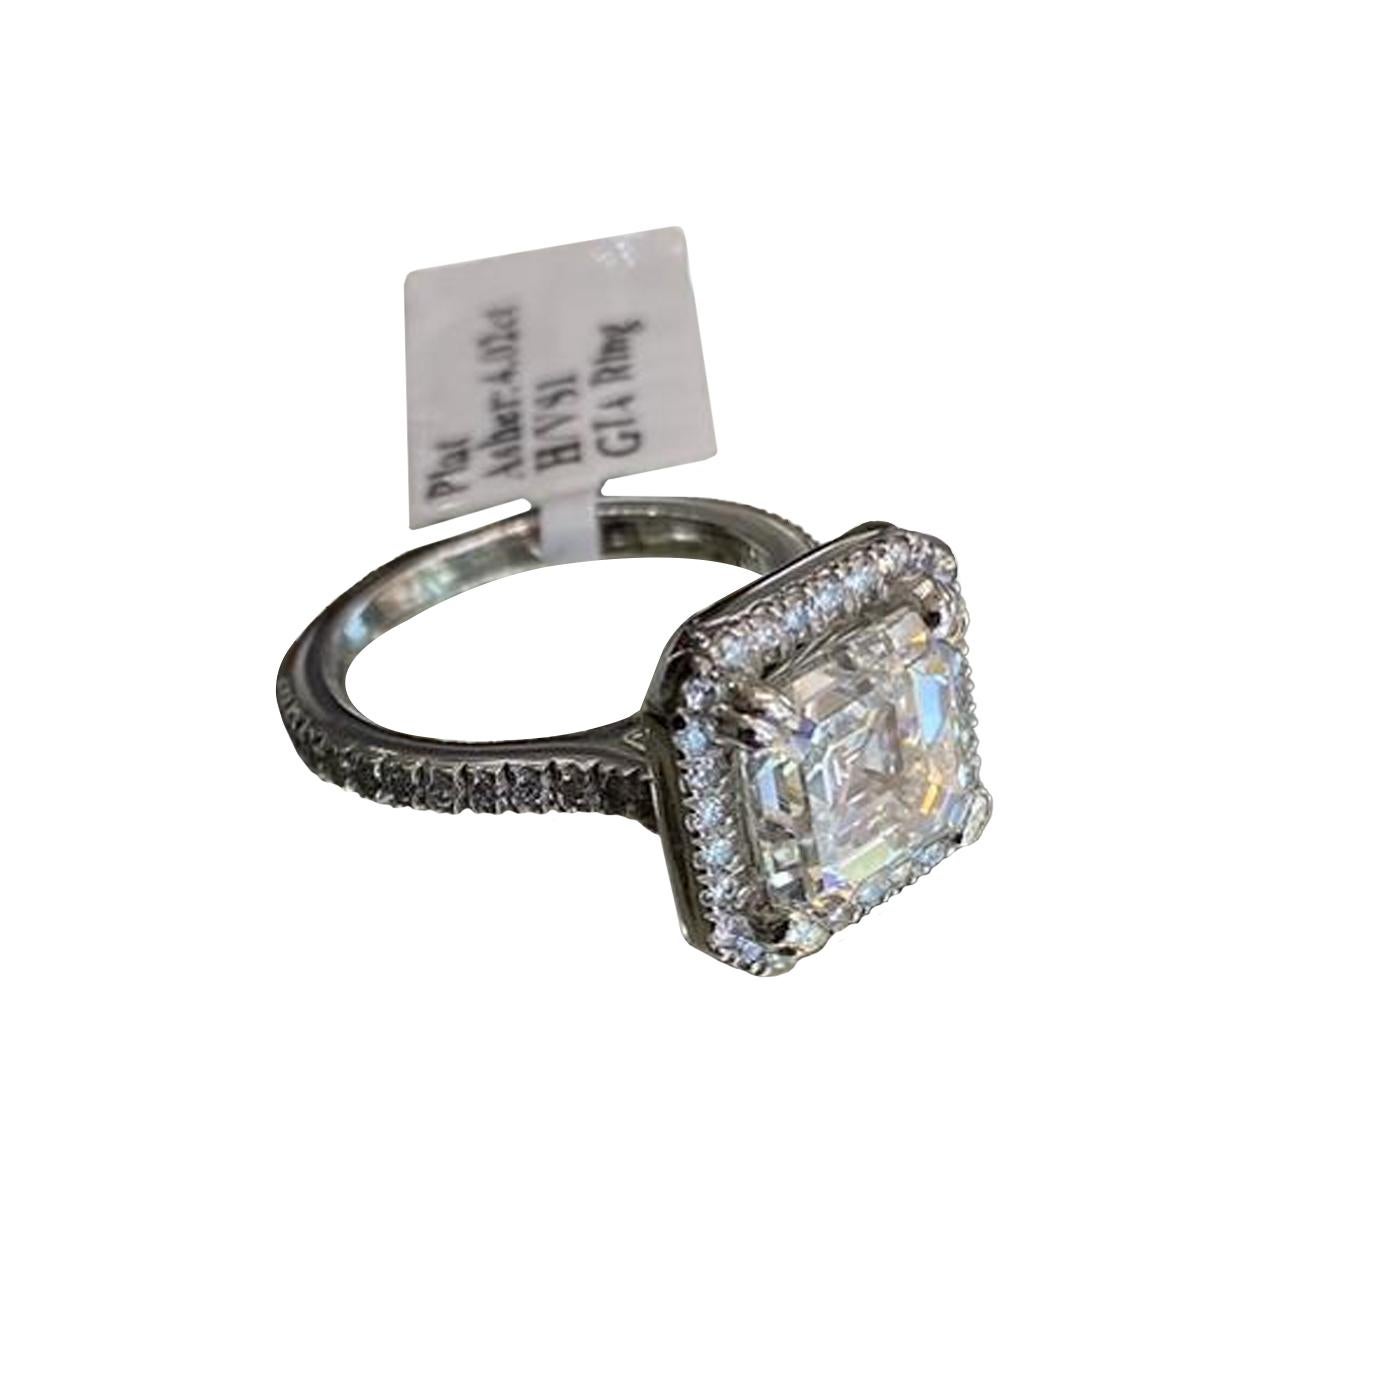 GIA Certified 4.02ct Asscher Cut Diamond VS1 Clarity H Color Platinum Ring For Sale 2